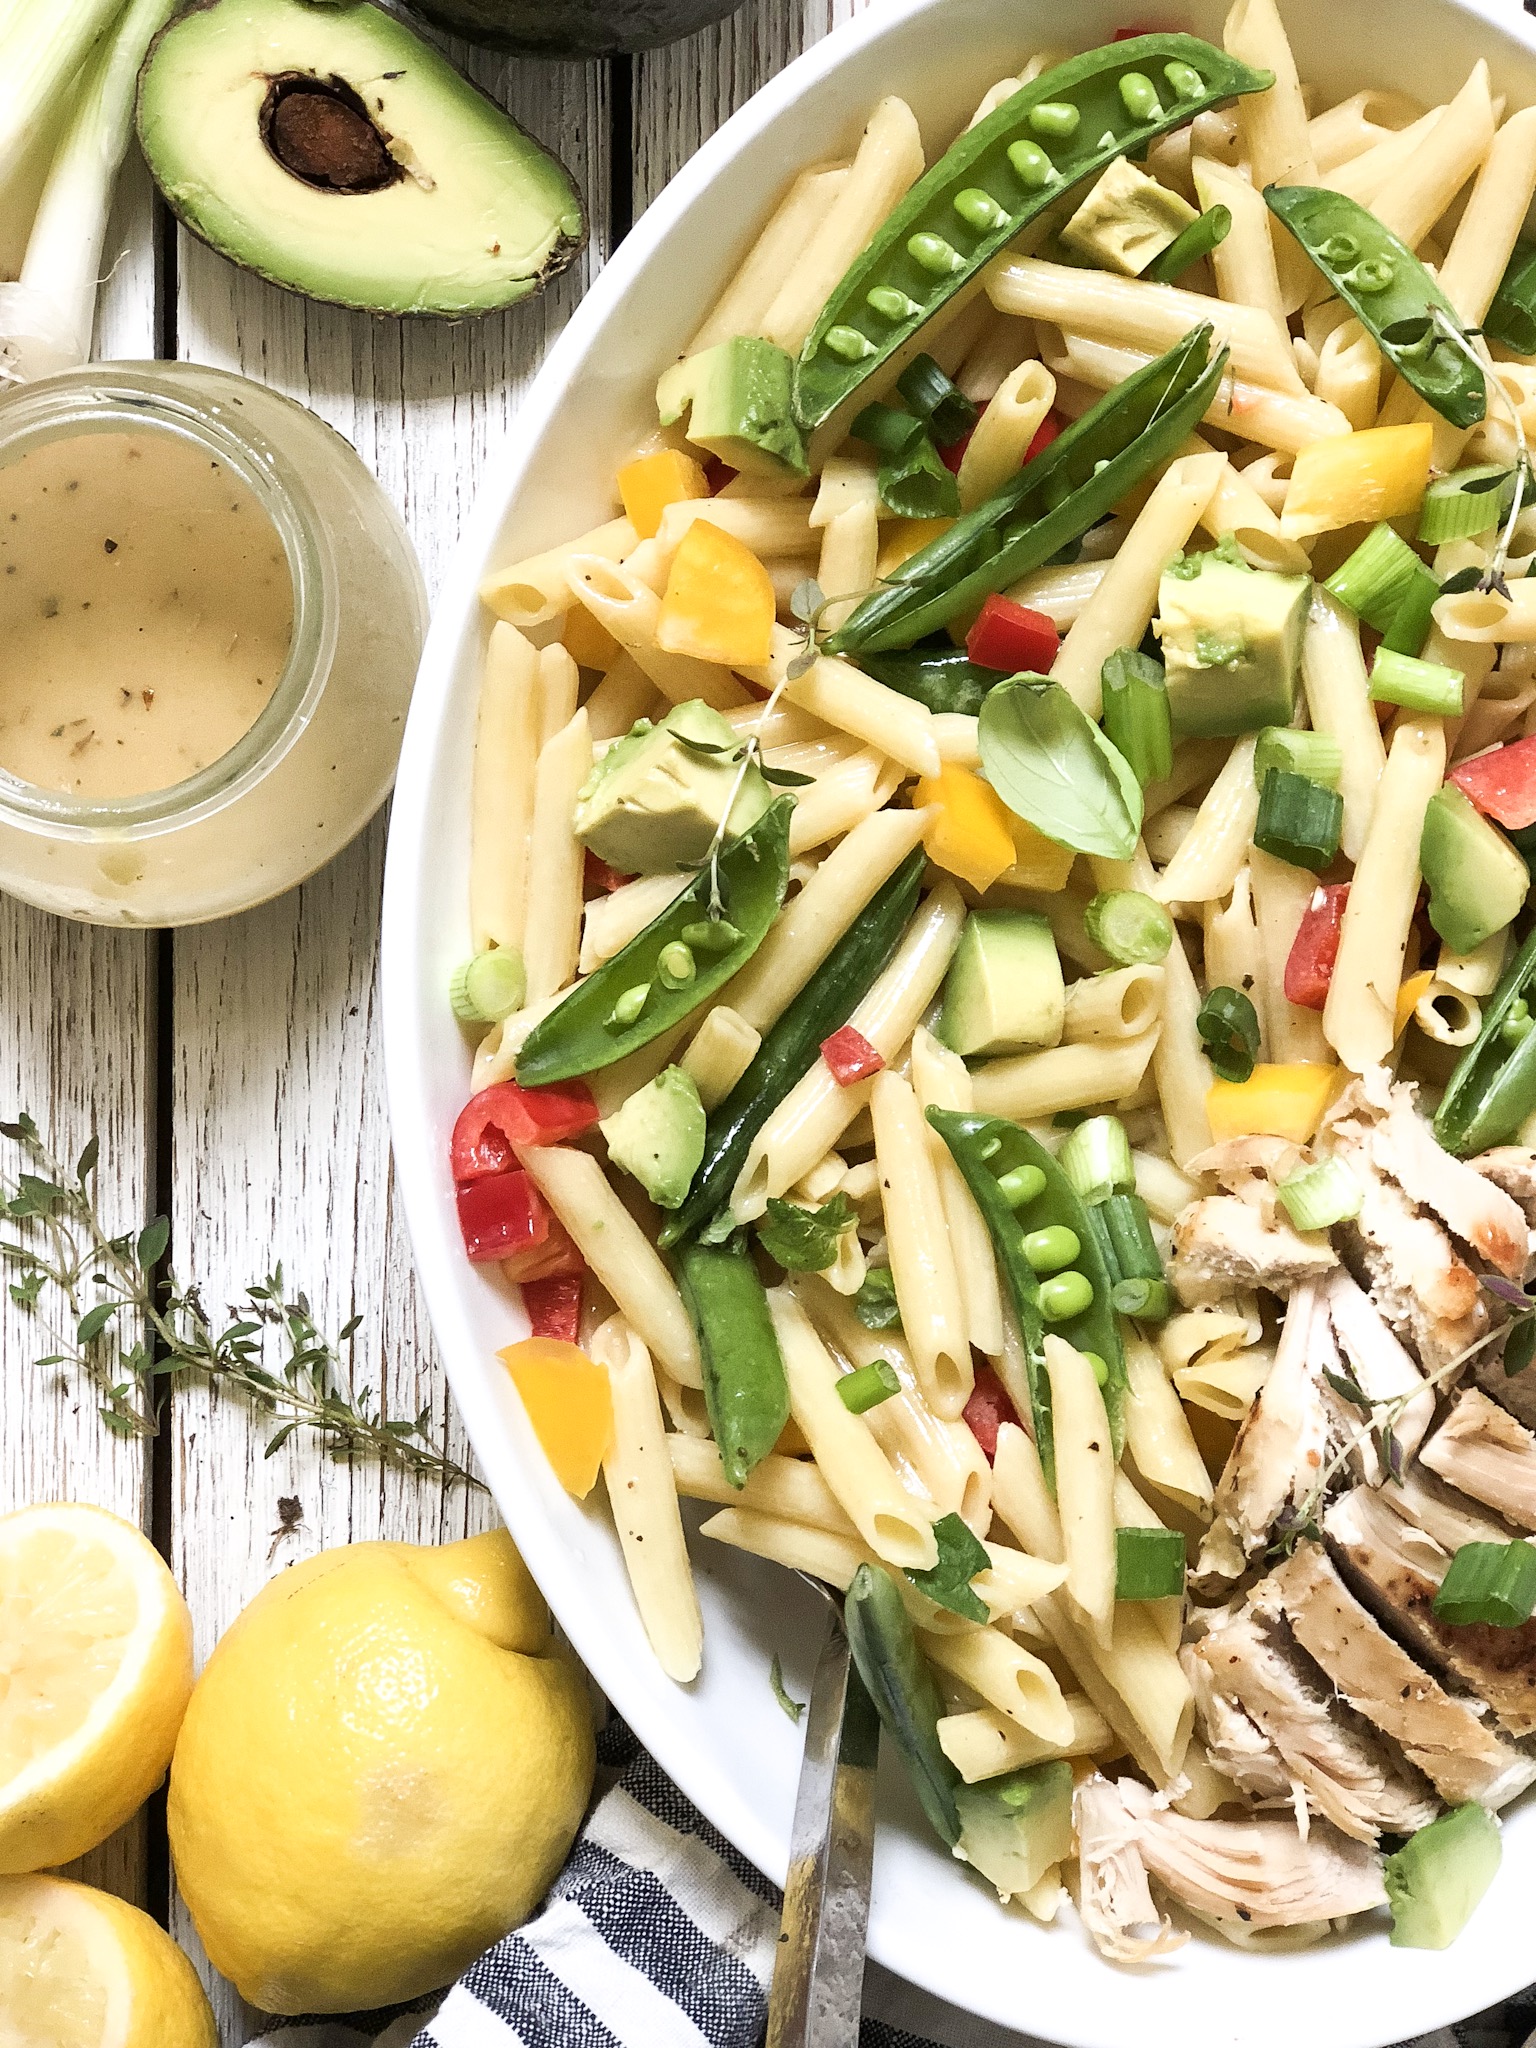 Lifestyle Blogger Chocolate and Lace shares her recipe for Avocado and Dijon Pasta Salad.